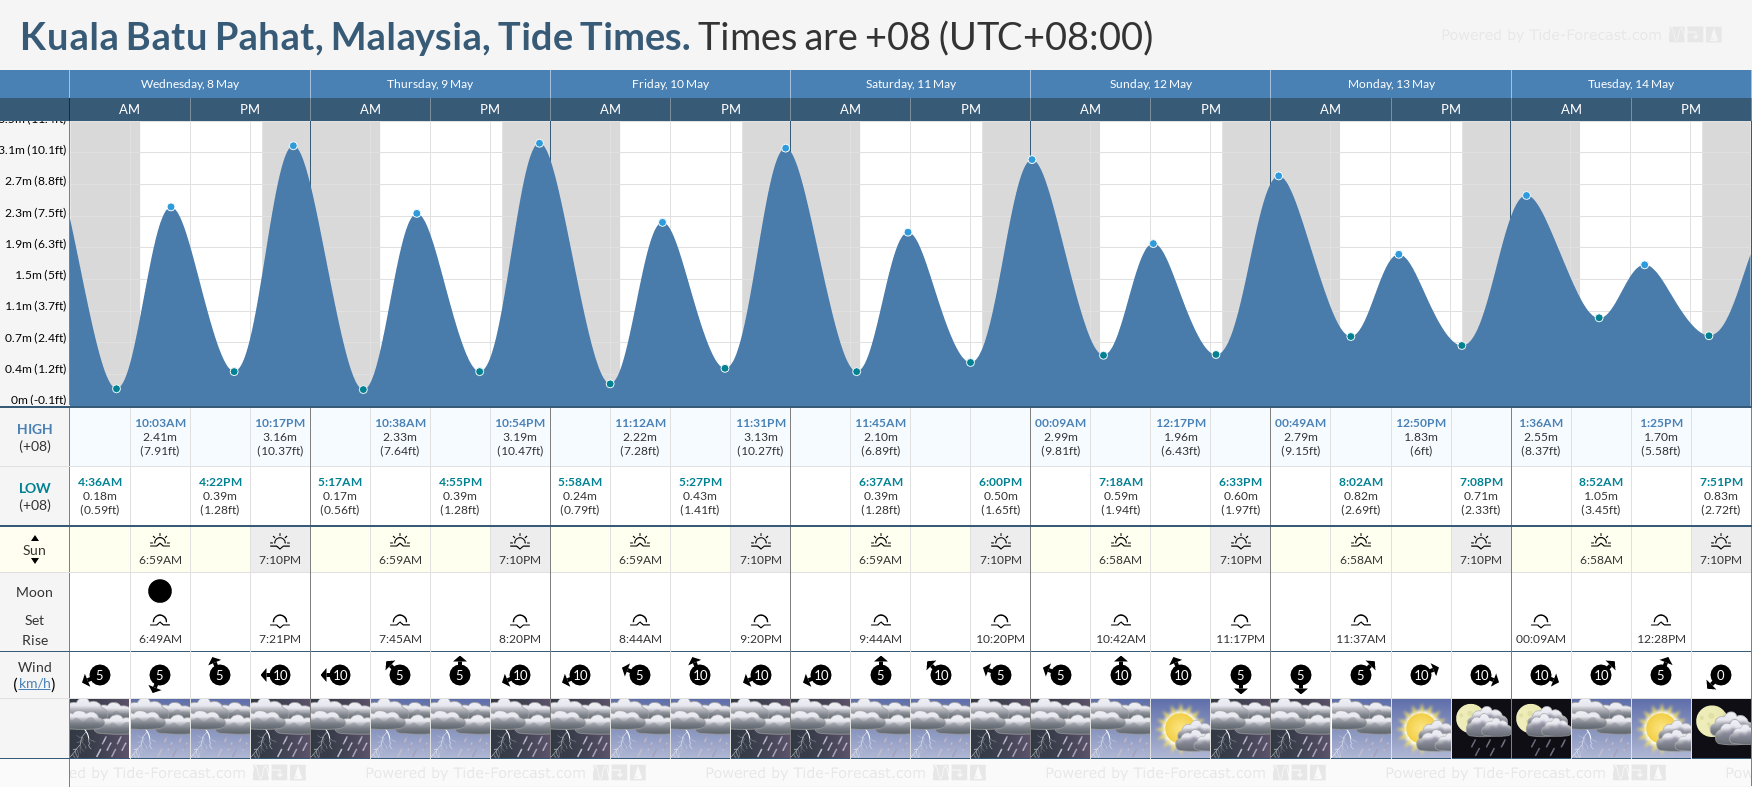 Kuala Batu Pahat, Malaysia Tide Chart including high and low tide times for the next 7 days